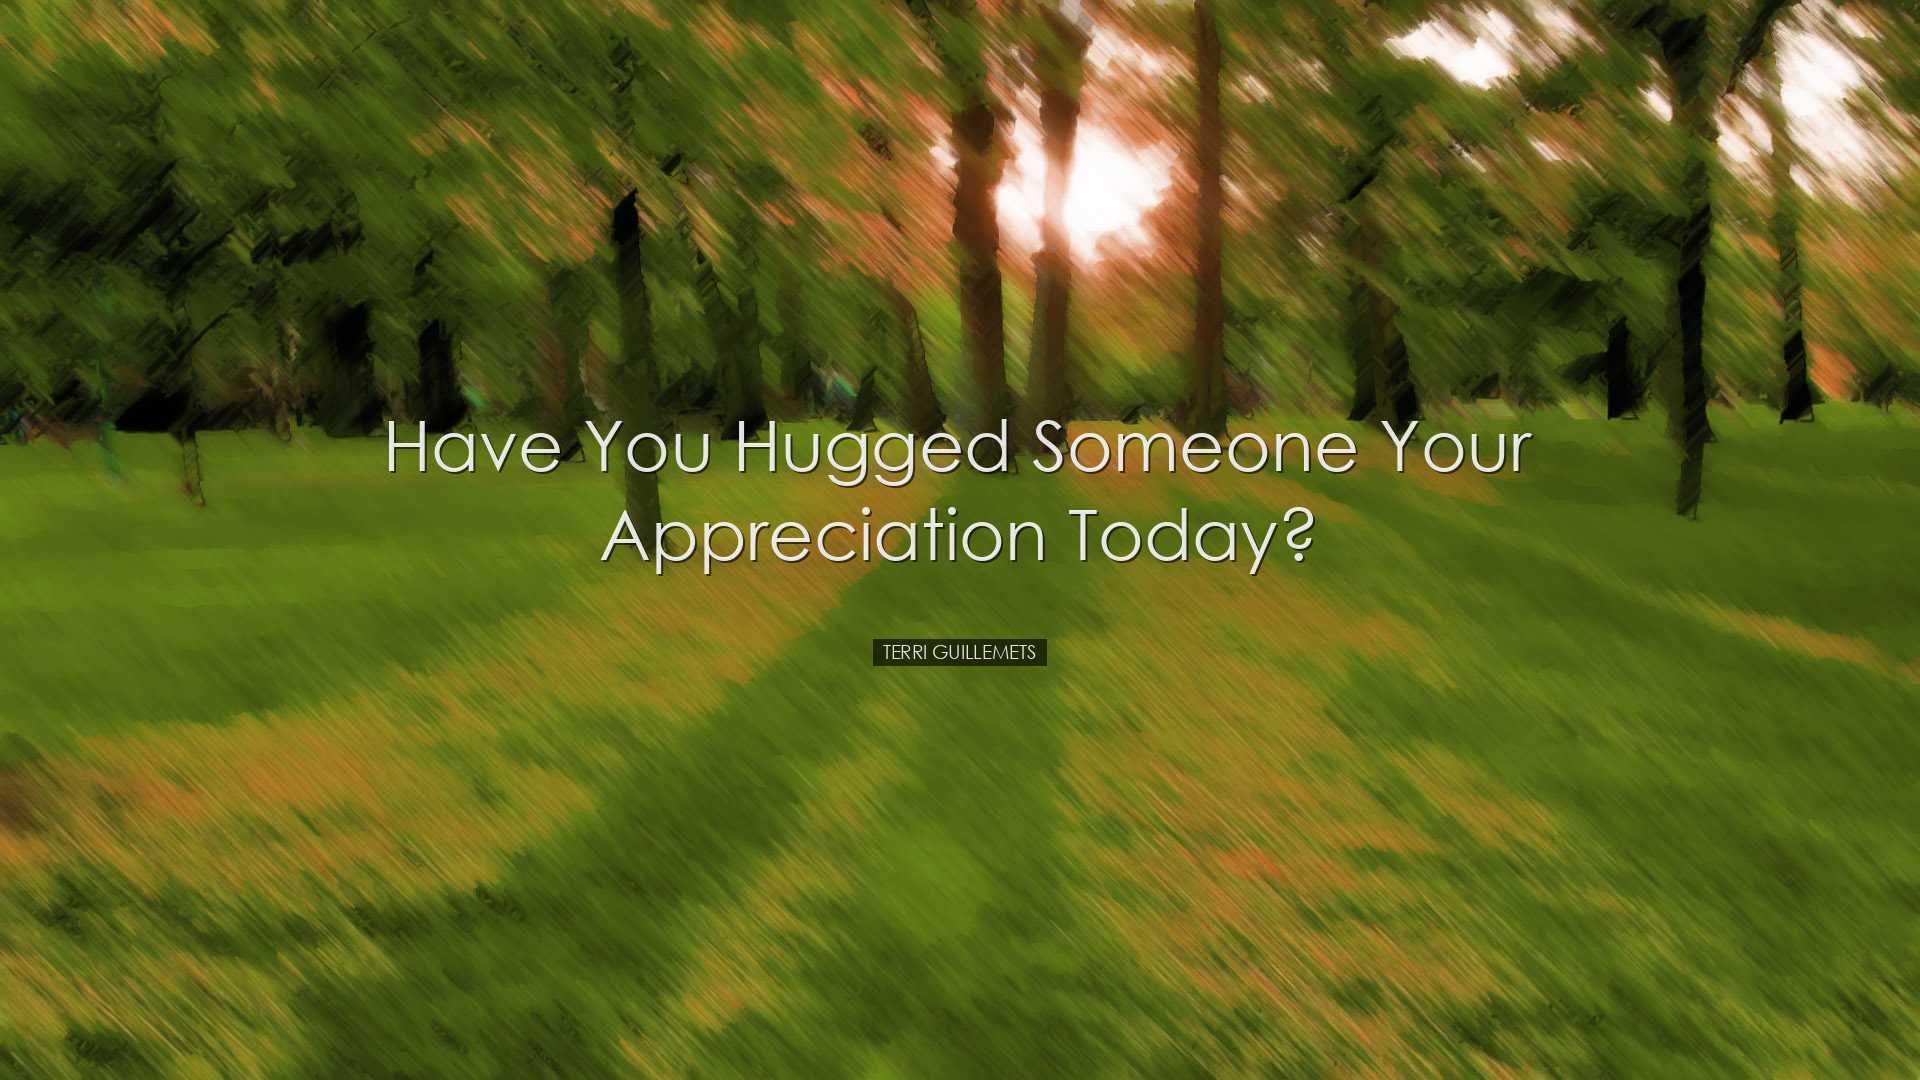 Have you hugged someone your appreciation today? - Terri Guillemet